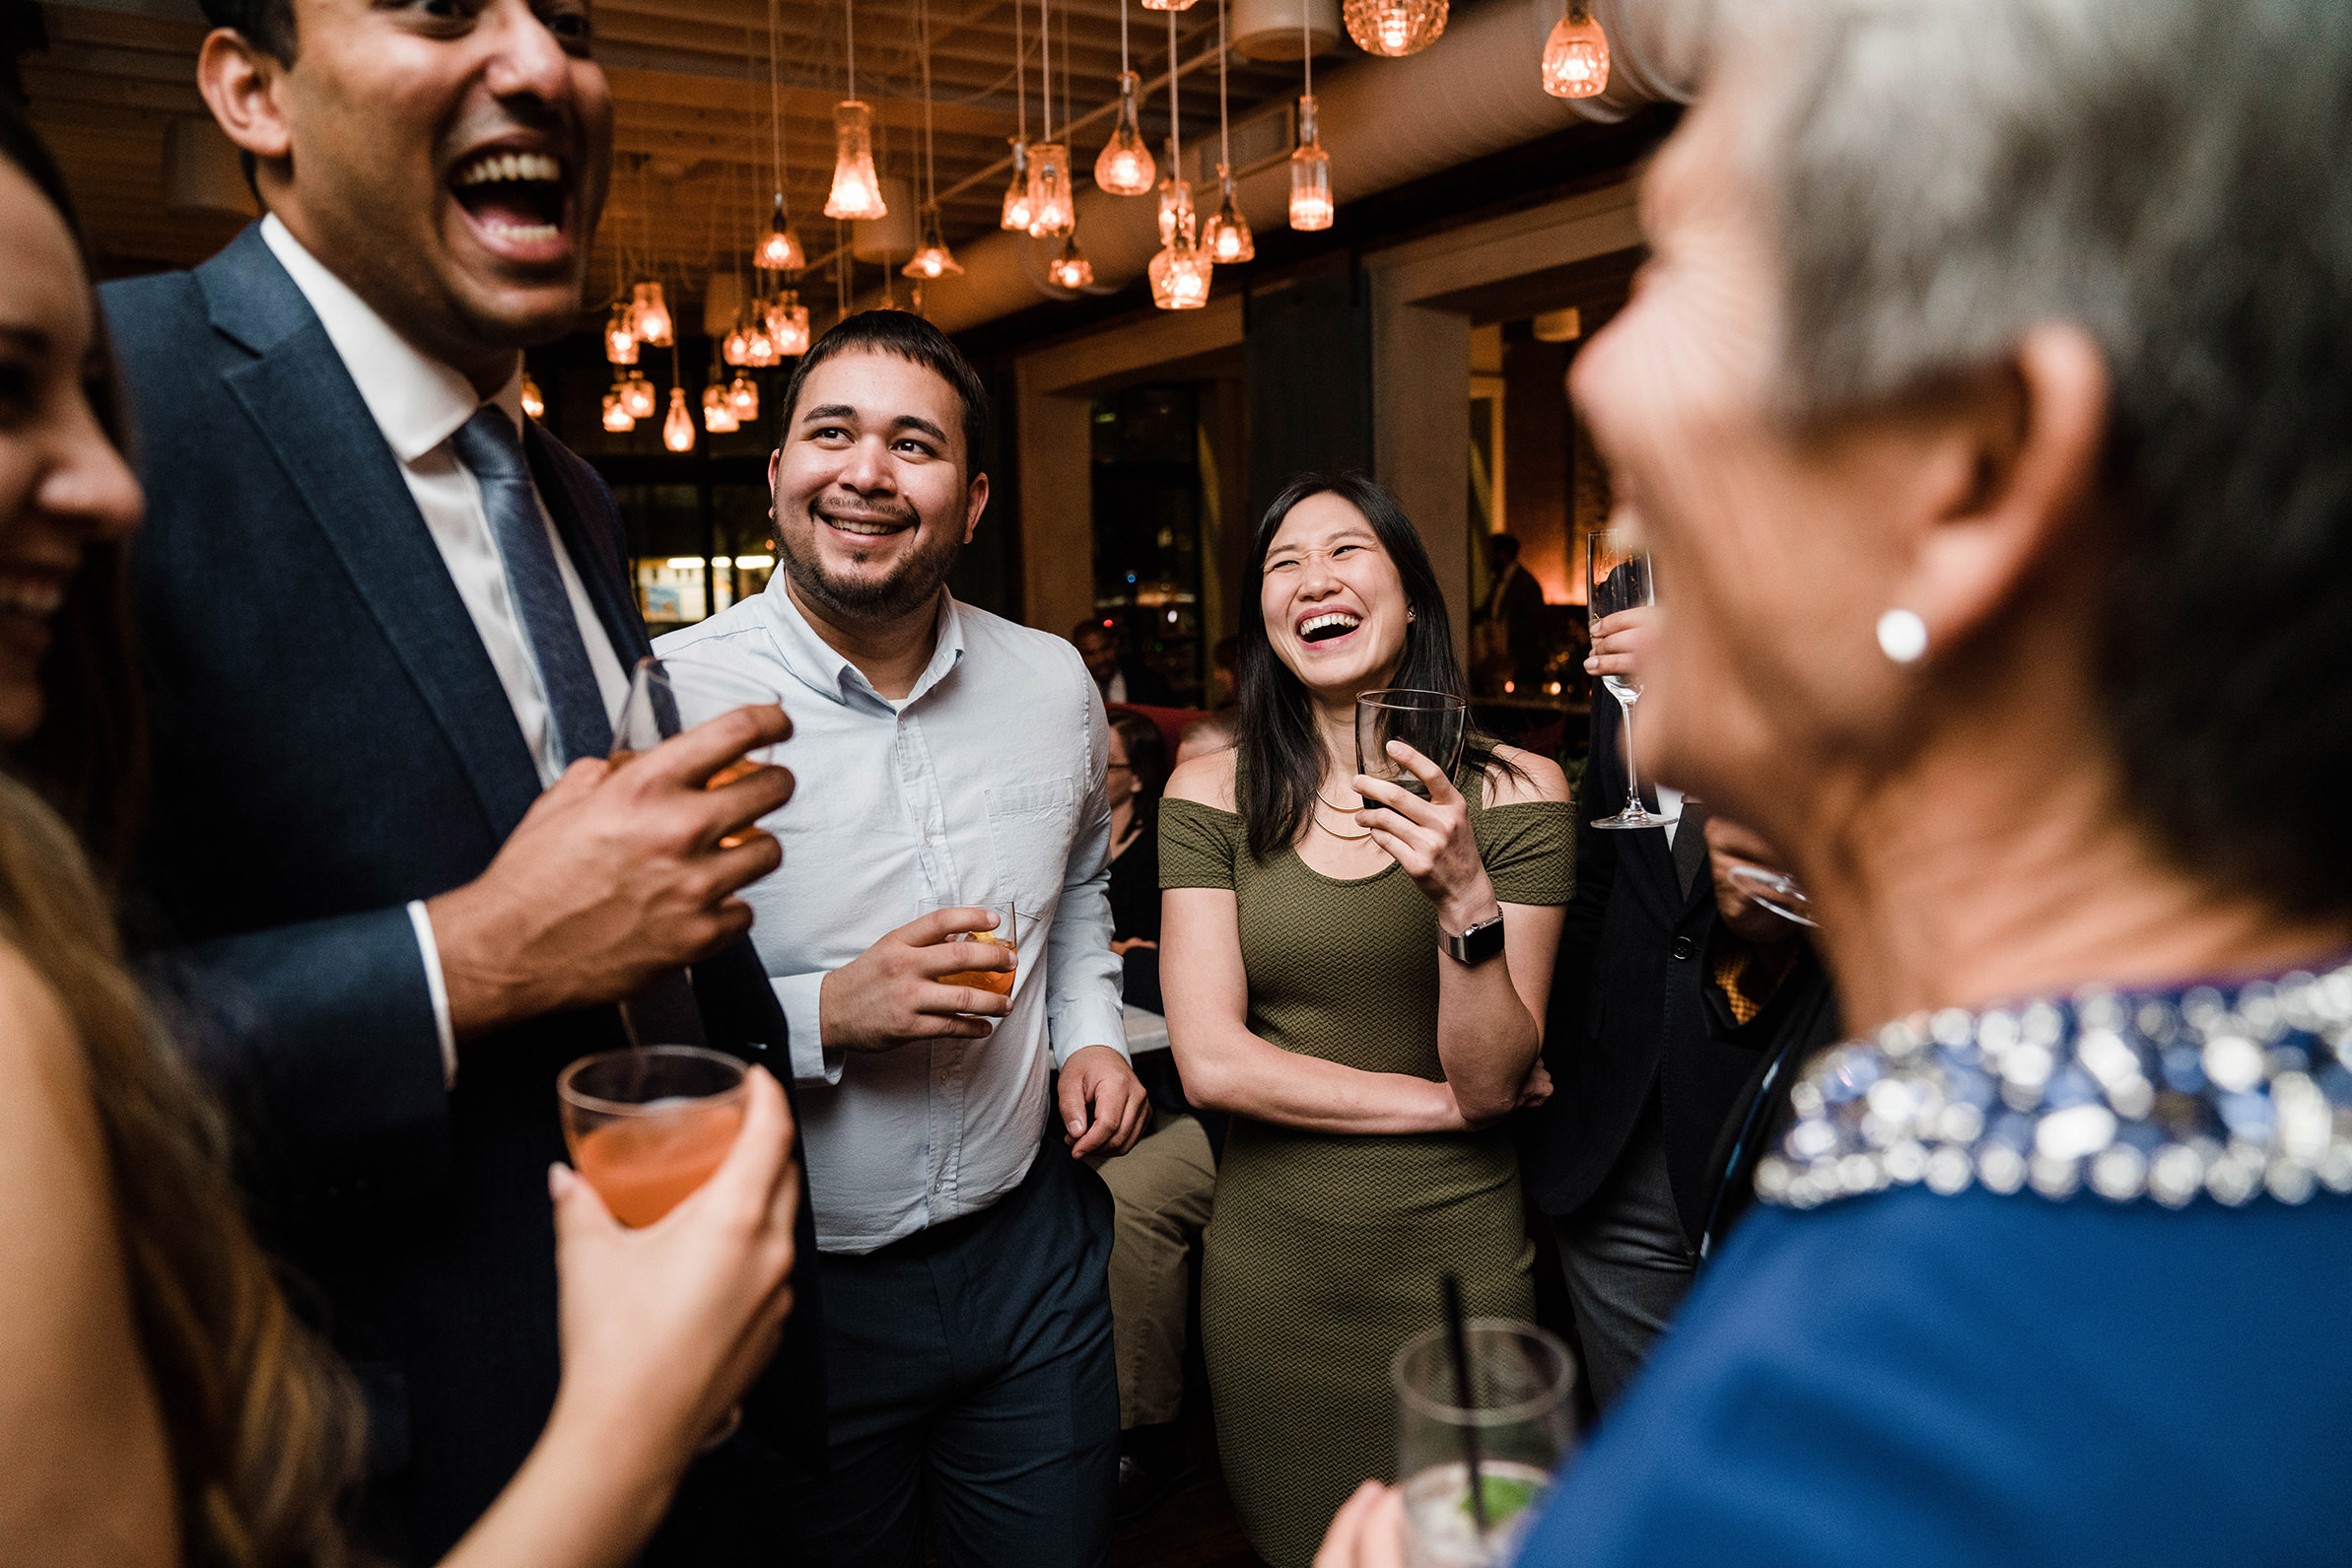 A documentary photograph featured in the best of wedding photography of 2019 showing guests laughing during cocktail hour